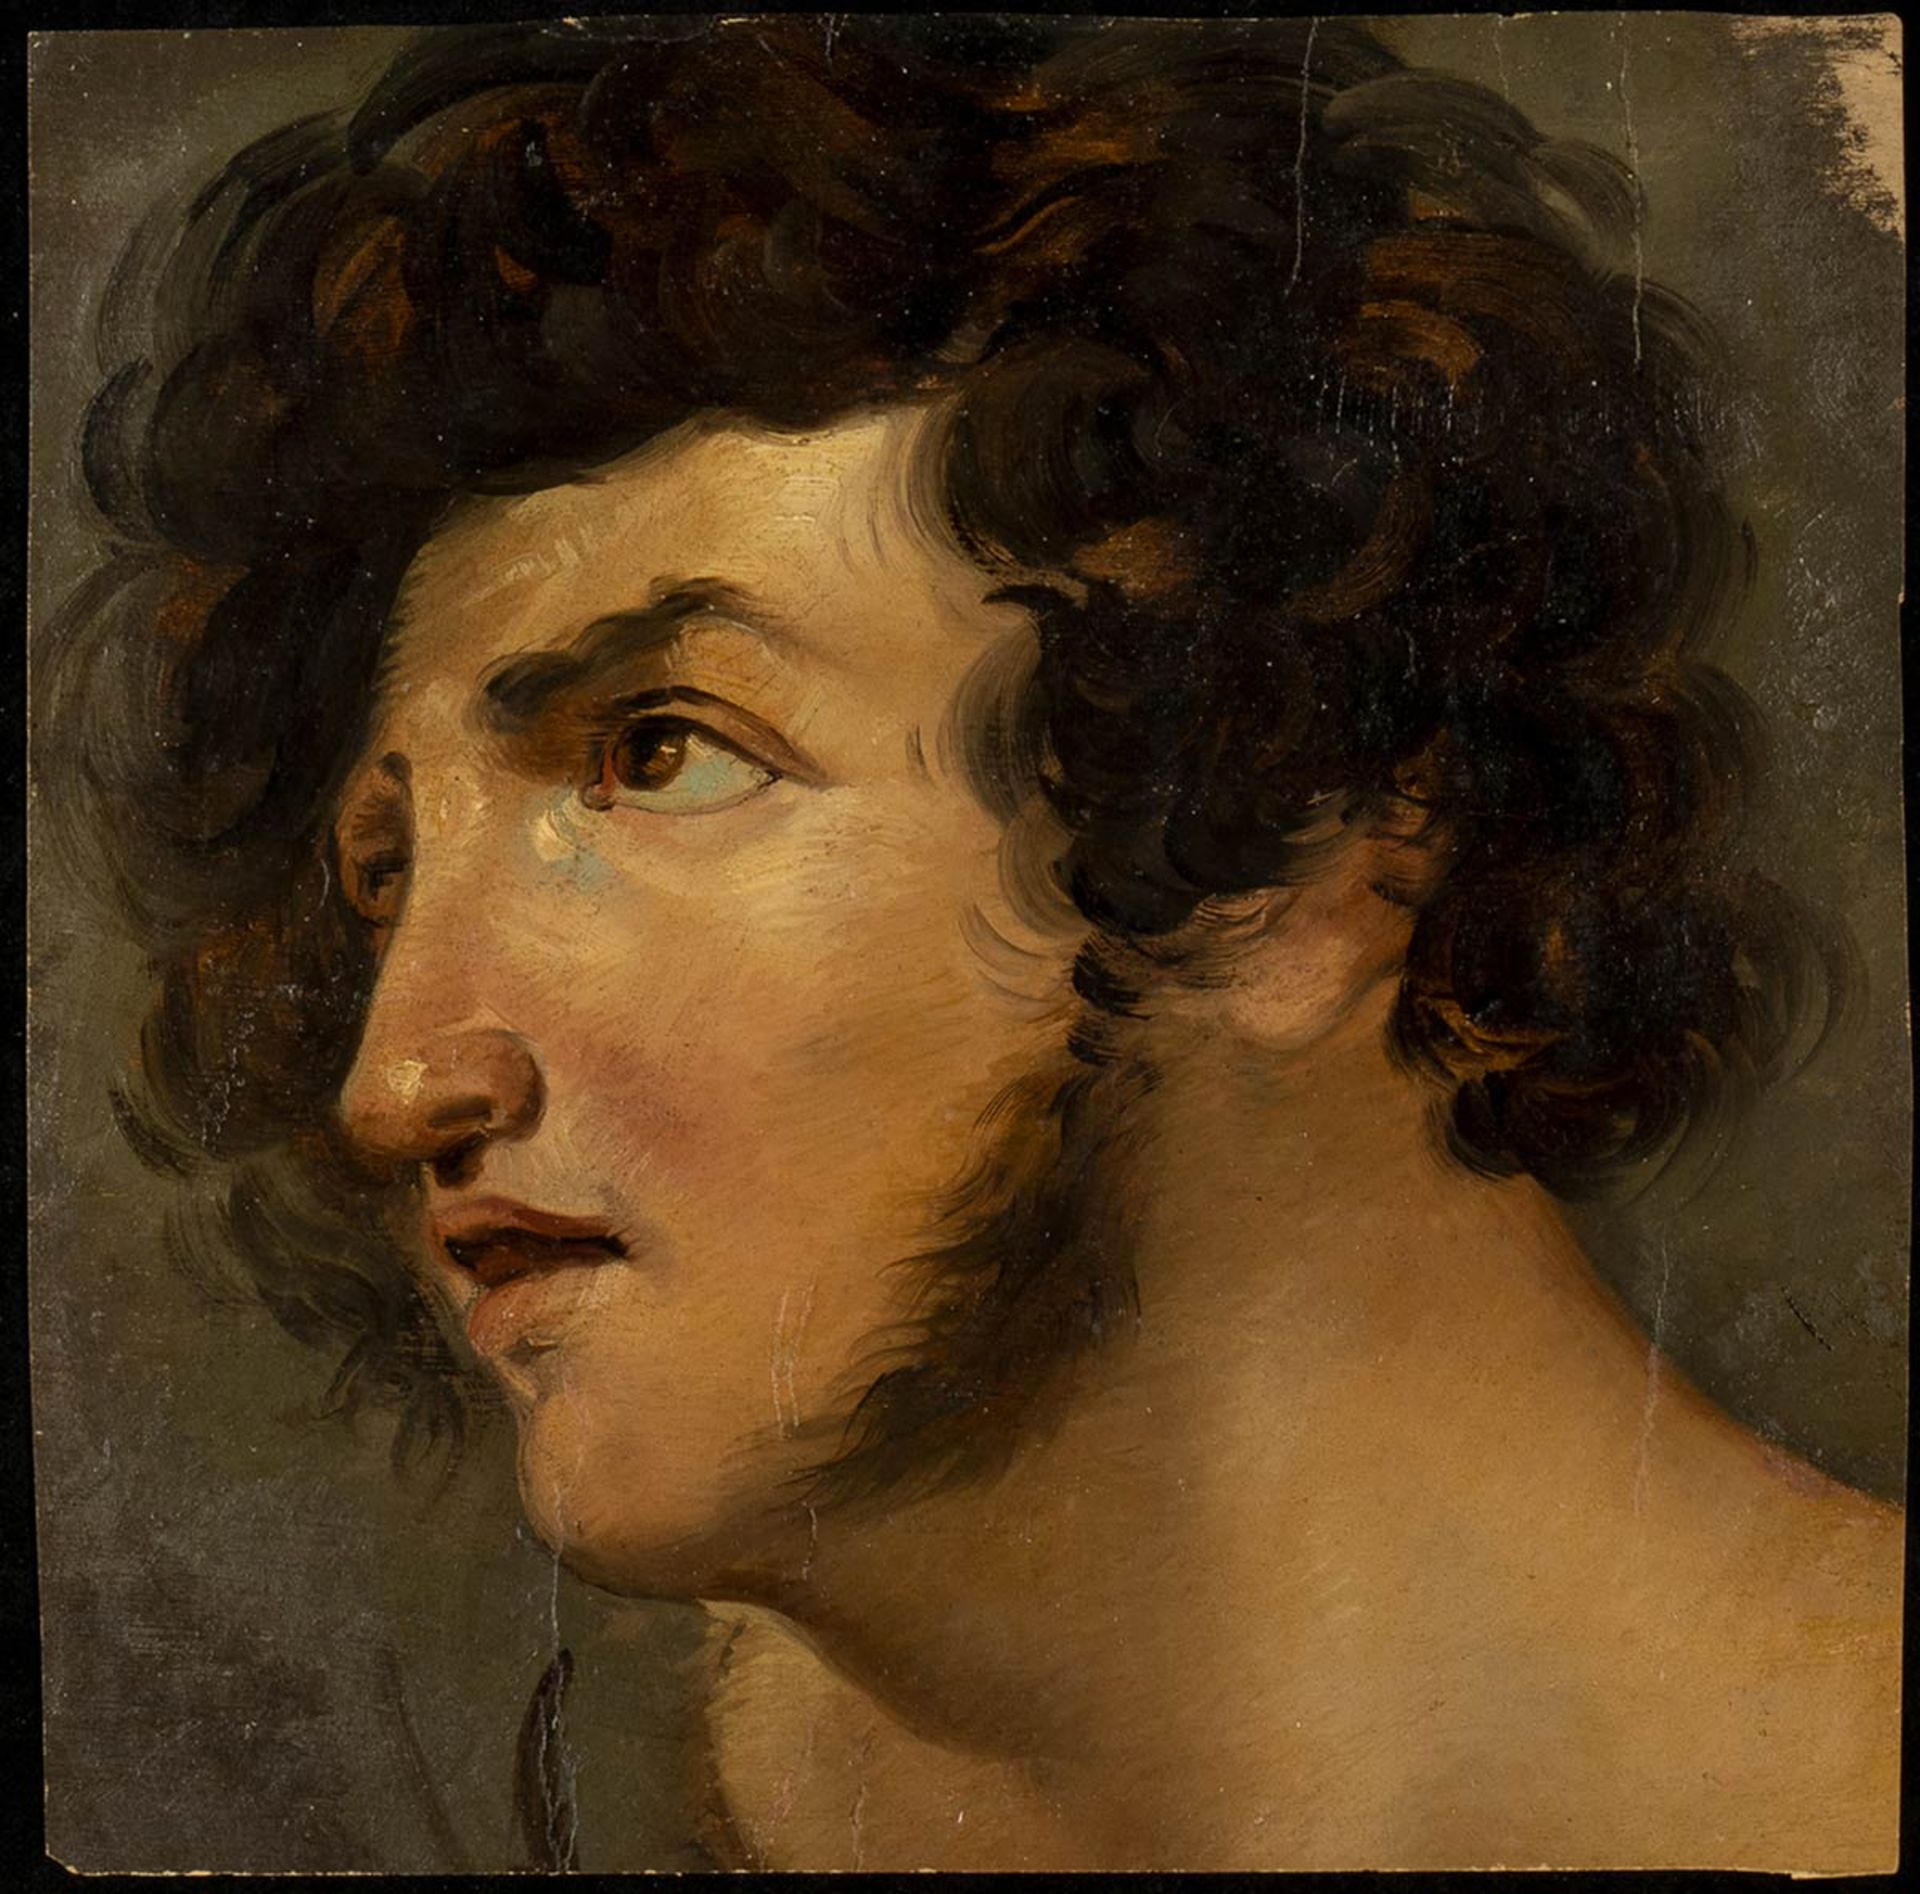 ROMAN NEOCLASSICAL ARTIST, FIRST DECADS OF 19th CENTURY